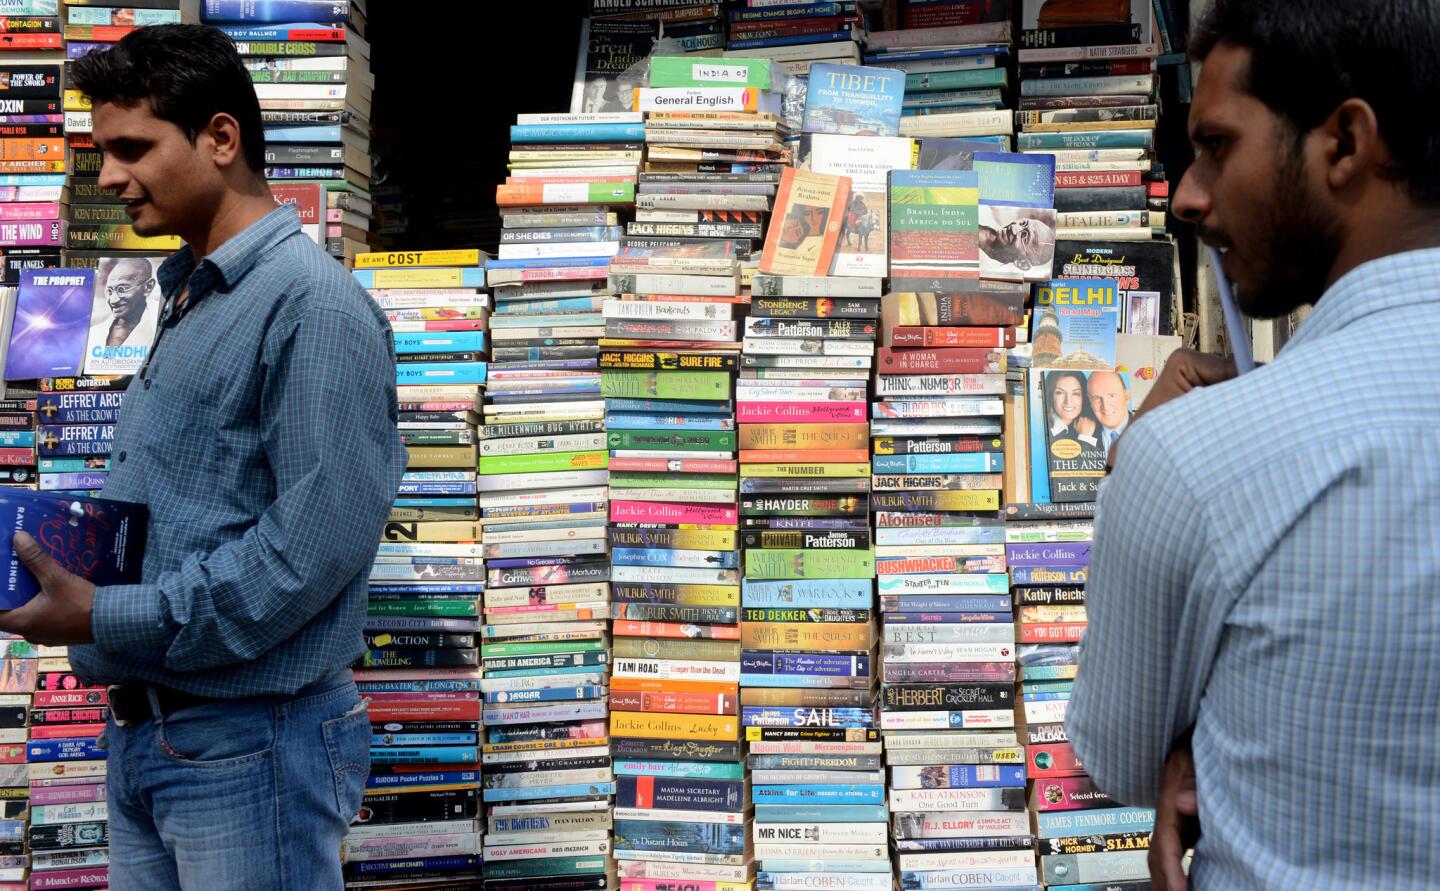 Shoppers browse books in multiple languages at an outdoor stall in New Delhi.